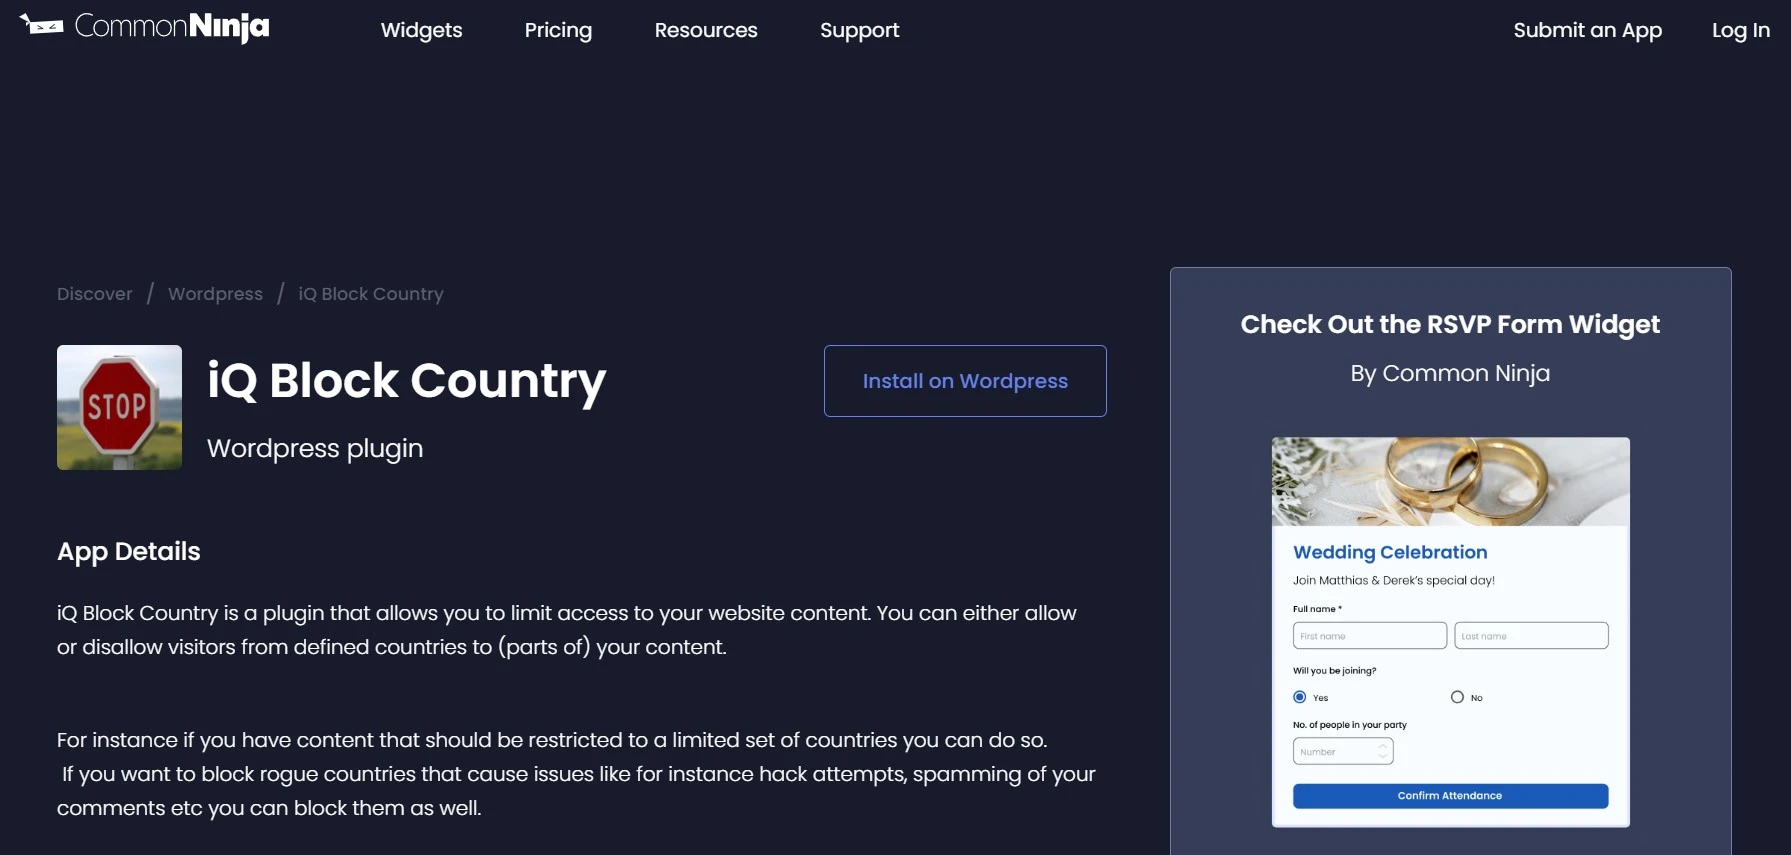 Iq Block Country Allows You To Control Access To Your Site Based On The Visitor's Country.webp